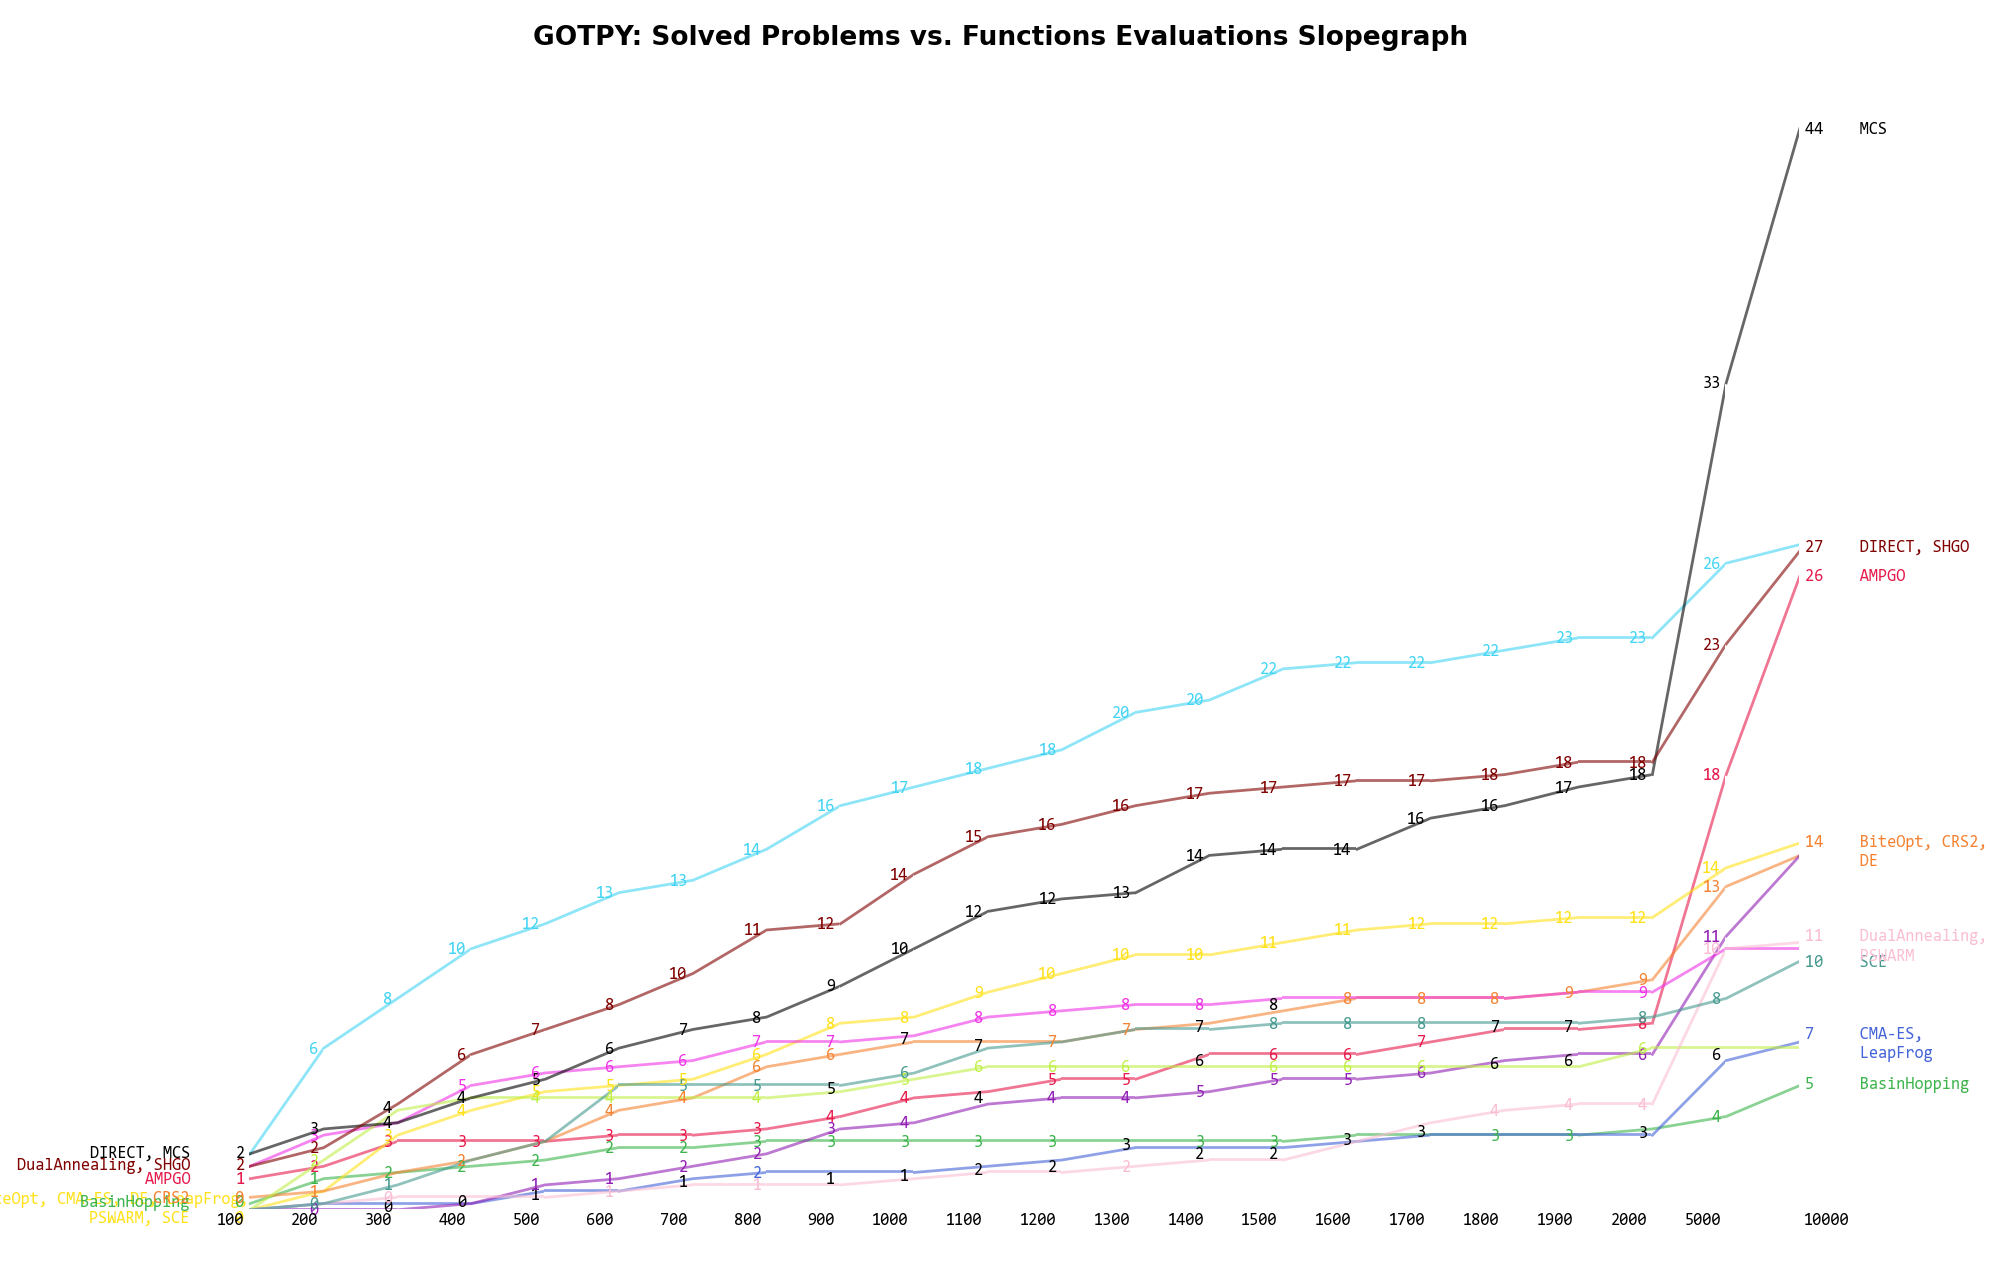 Percentage of problems solved given a fixed number of function evaluations on the GOTPY test suite